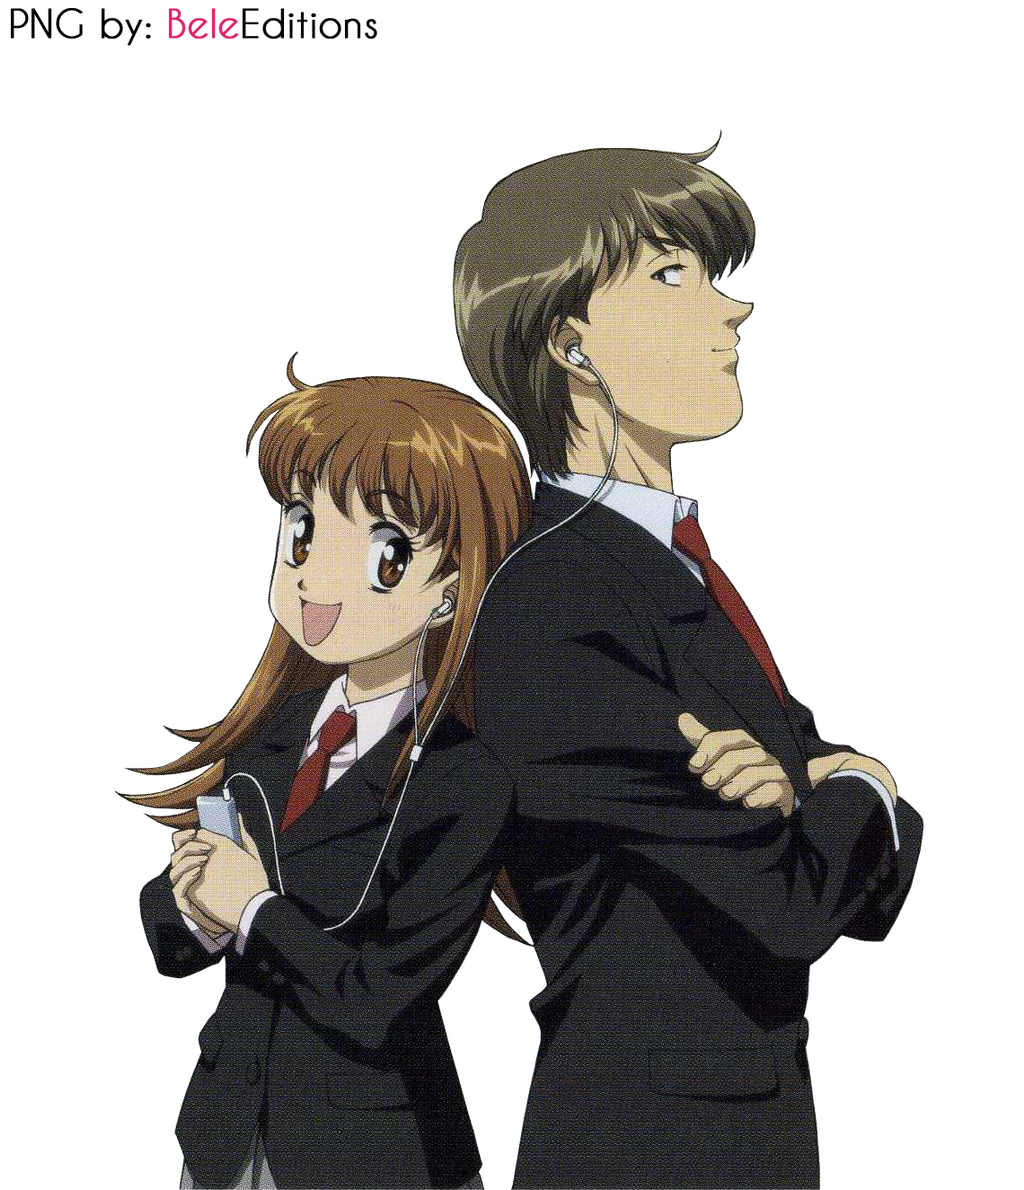 Itazura na Kiss PNG by BeleEditions by BeleEditions on DeviantArt